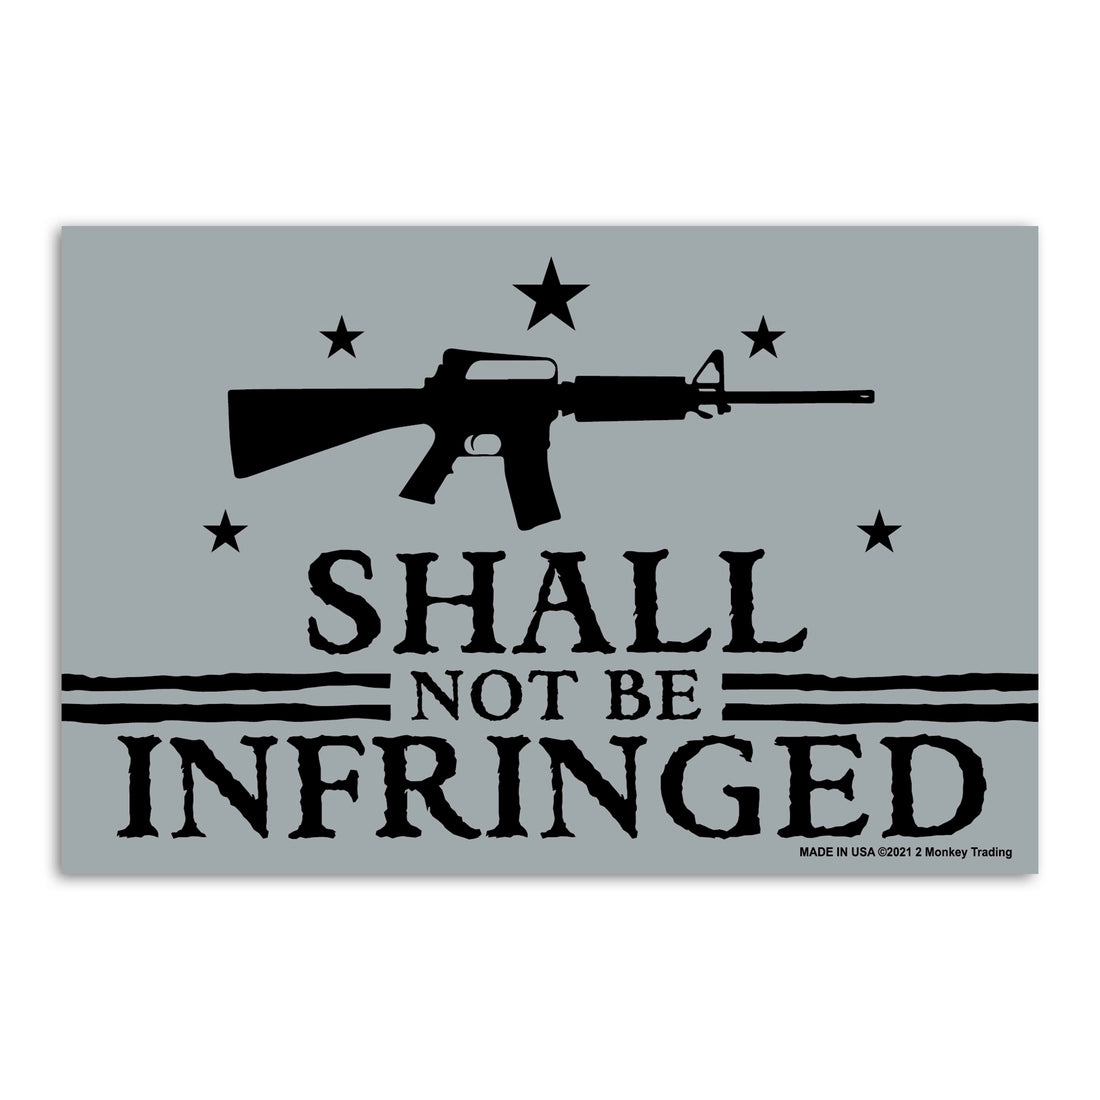 Shall Not Be Infringed Sticker